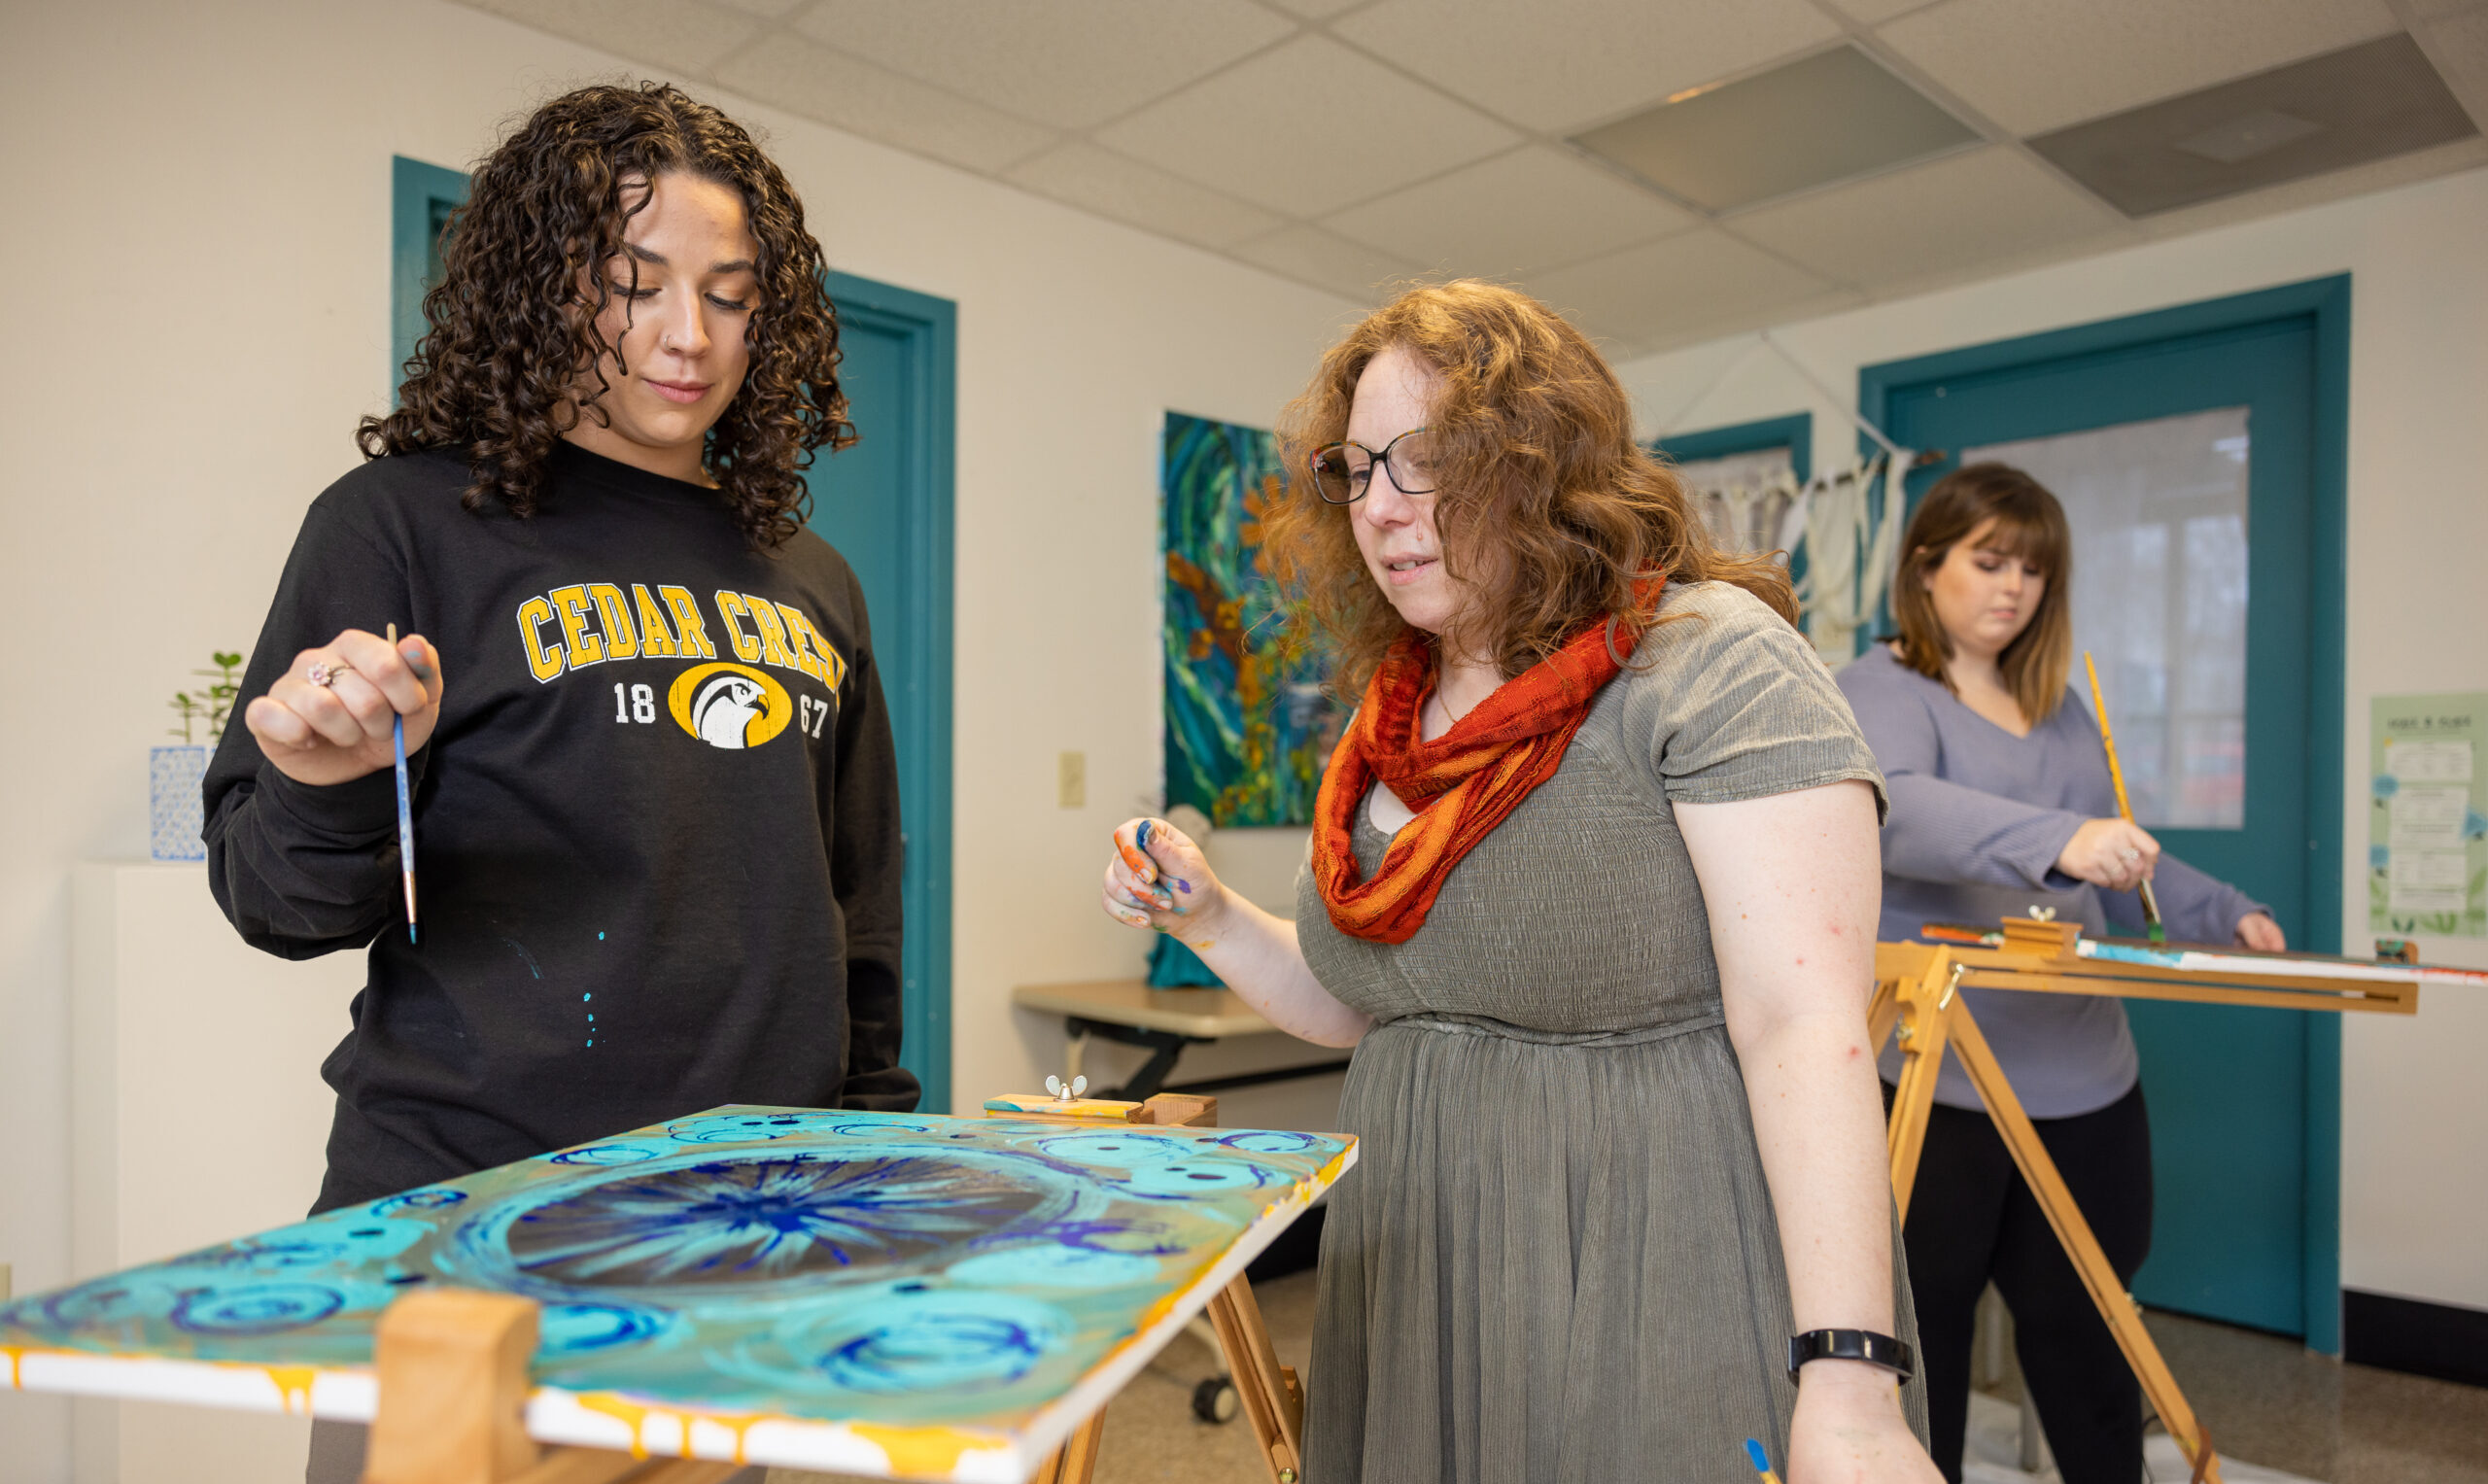 Art therapy student stands over her painting, in conversation with her professor